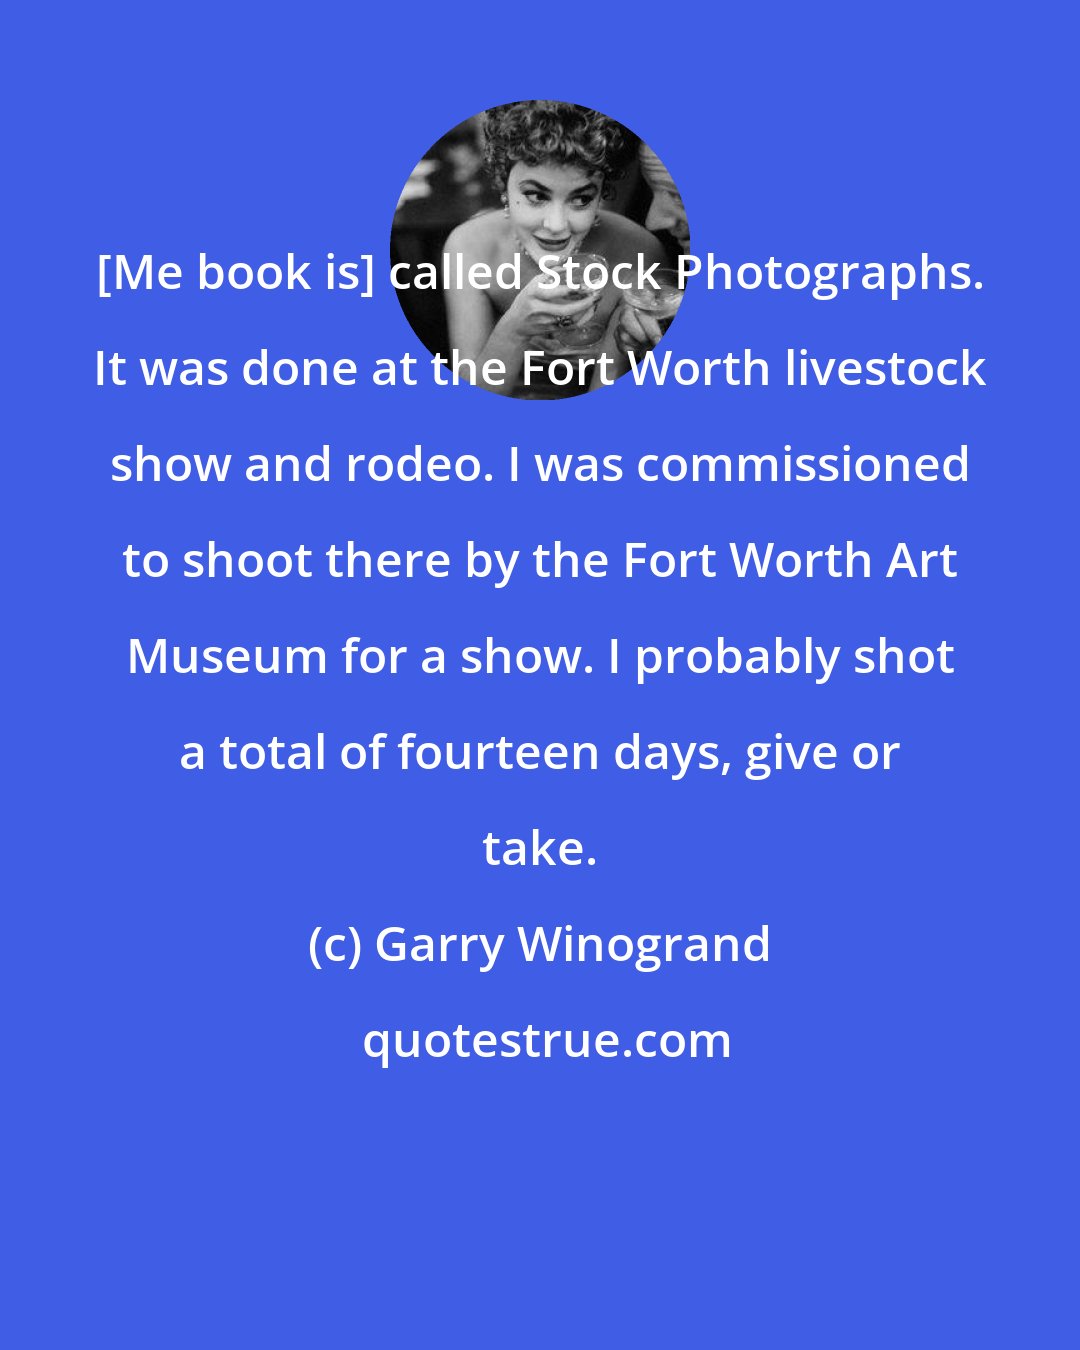 Garry Winogrand: [Me book is] called Stock Photographs. It was done at the Fort Worth livestock show and rodeo. I was commissioned to shoot there by the Fort Worth Art Museum for a show. I probably shot a total of fourteen days, give or take.